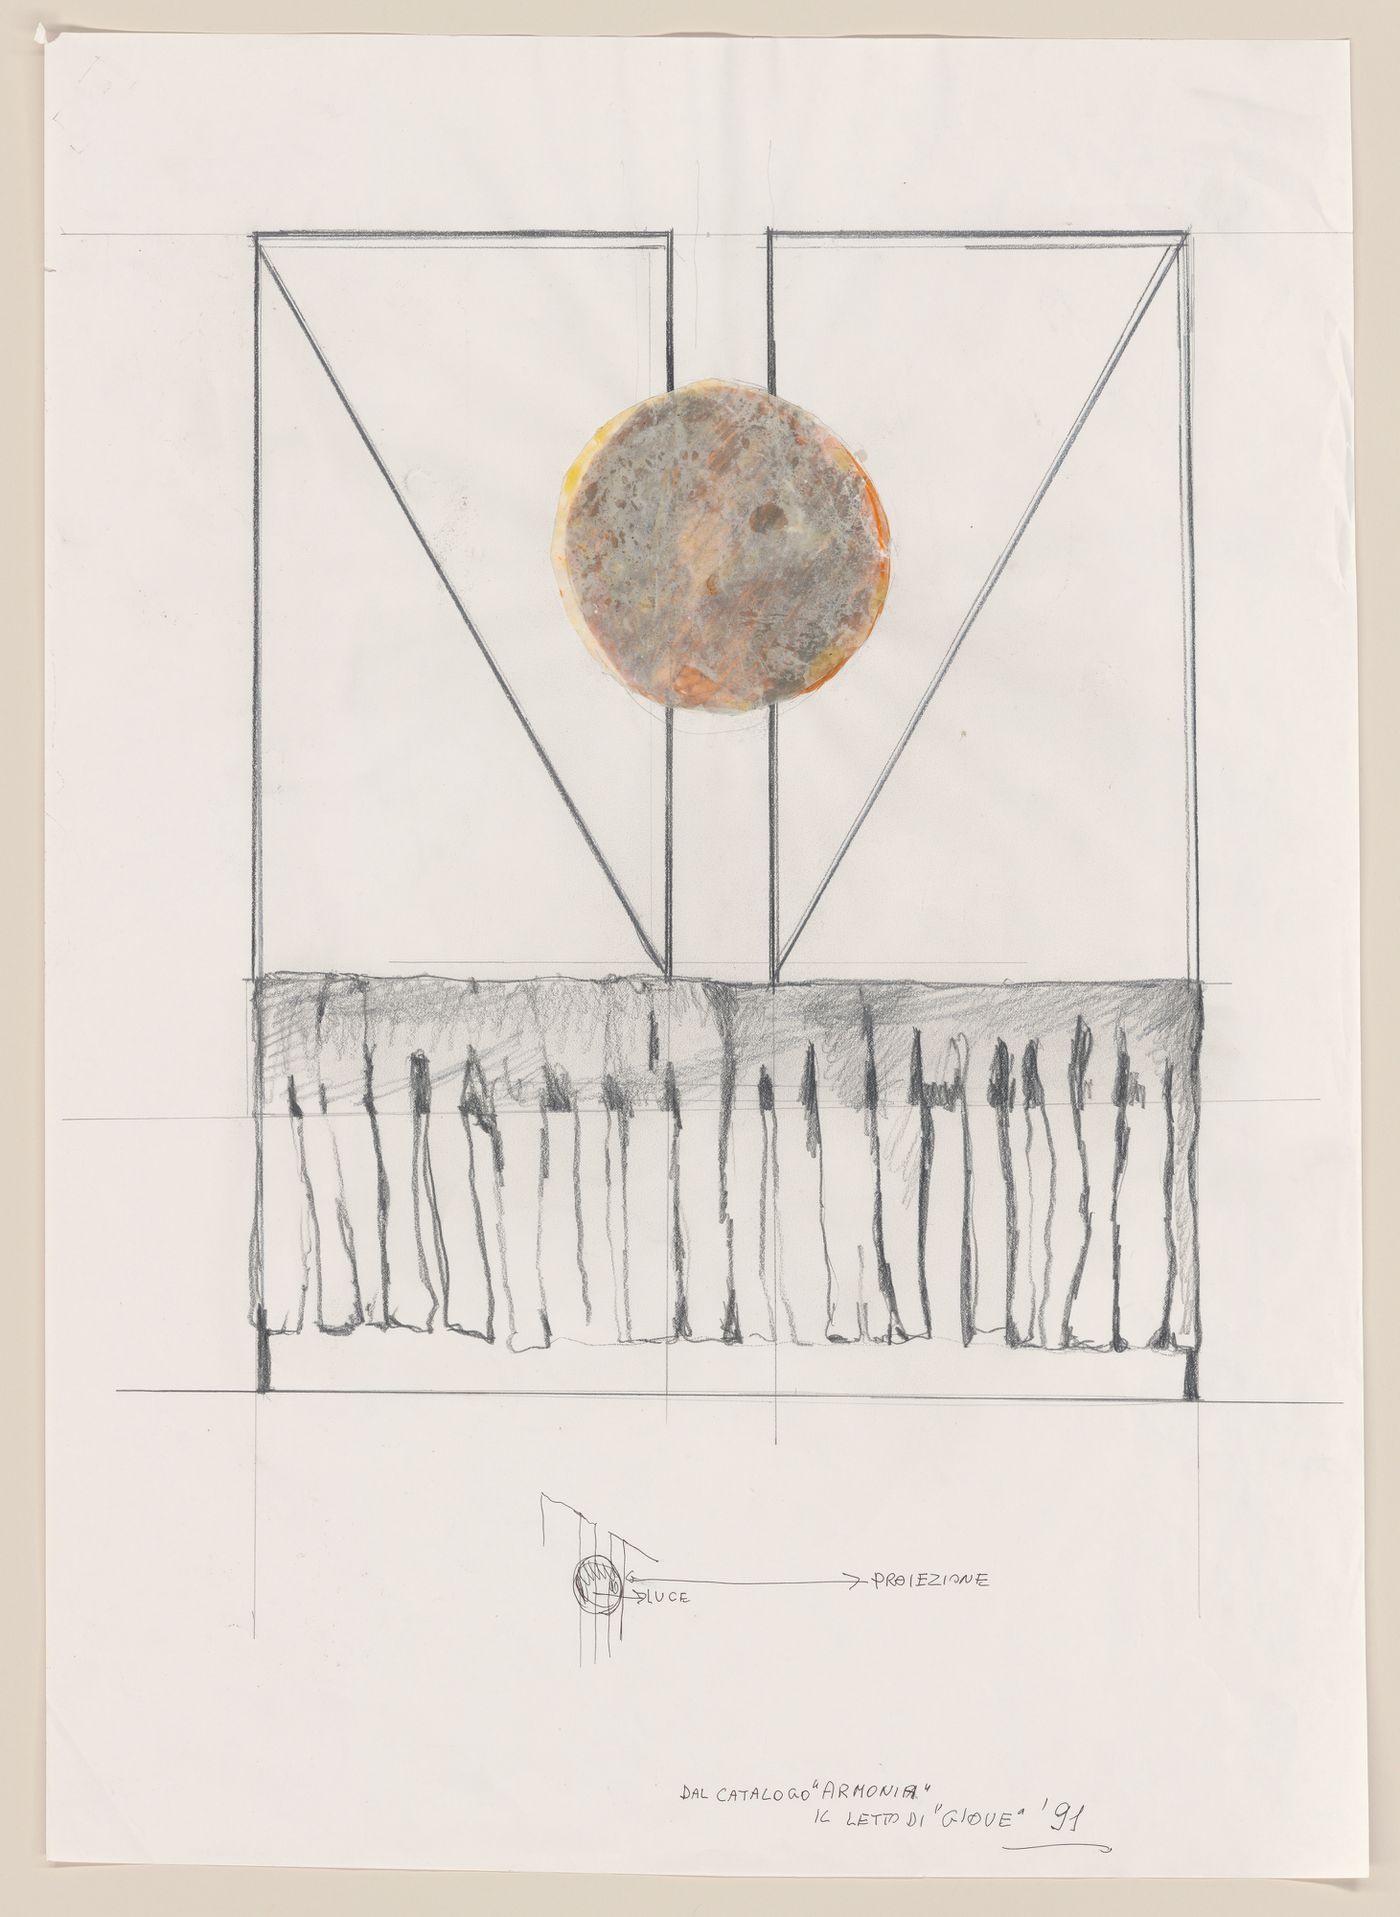 Sketch elevation for Bed project Il carro di giove [Jupiter's chariot]